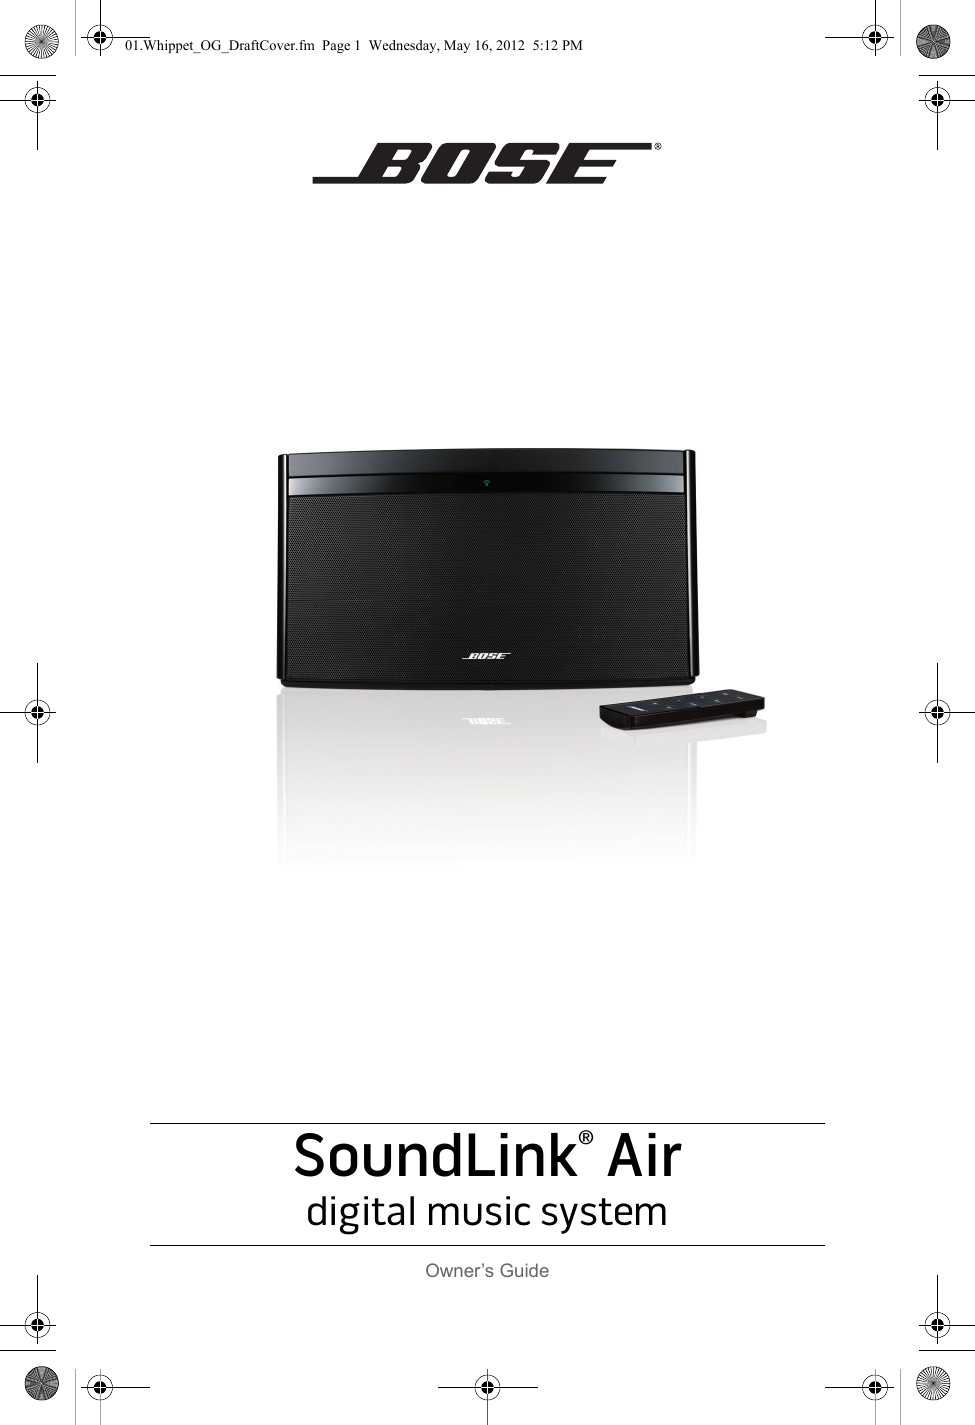 SoundLink® Airdigital music systemOwner’s Guide01.Whippet_OG_DraftCover.fm  Page 1  Wednesday, May 16, 2012  5:12 PM